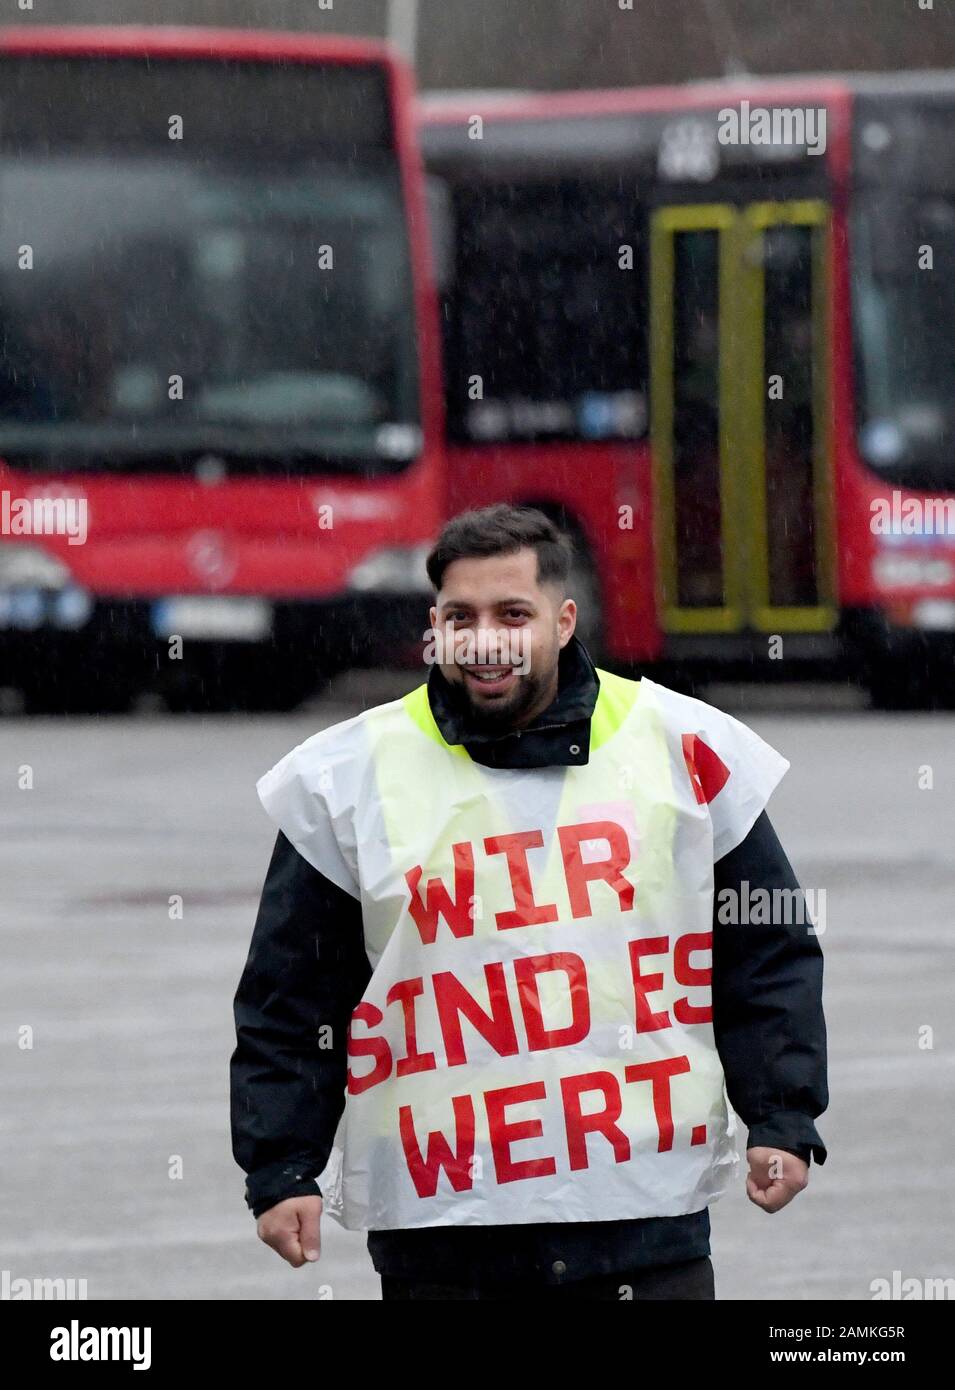 14 January 2020, Schleswig-Holstein, Kiel: A striking bus driver stands at the depot of the Kieler Verkehrsgesellschaft. The trade union Verdi had called for all-day warning strikes in the north in the wage dispute. Verdi Nord demands an increase in wages and salaries by 2.06 euros per hour from 01.01.2020 for around 1500 bus drivers. Photo: Carsten Rehder/dpa Stock Photo